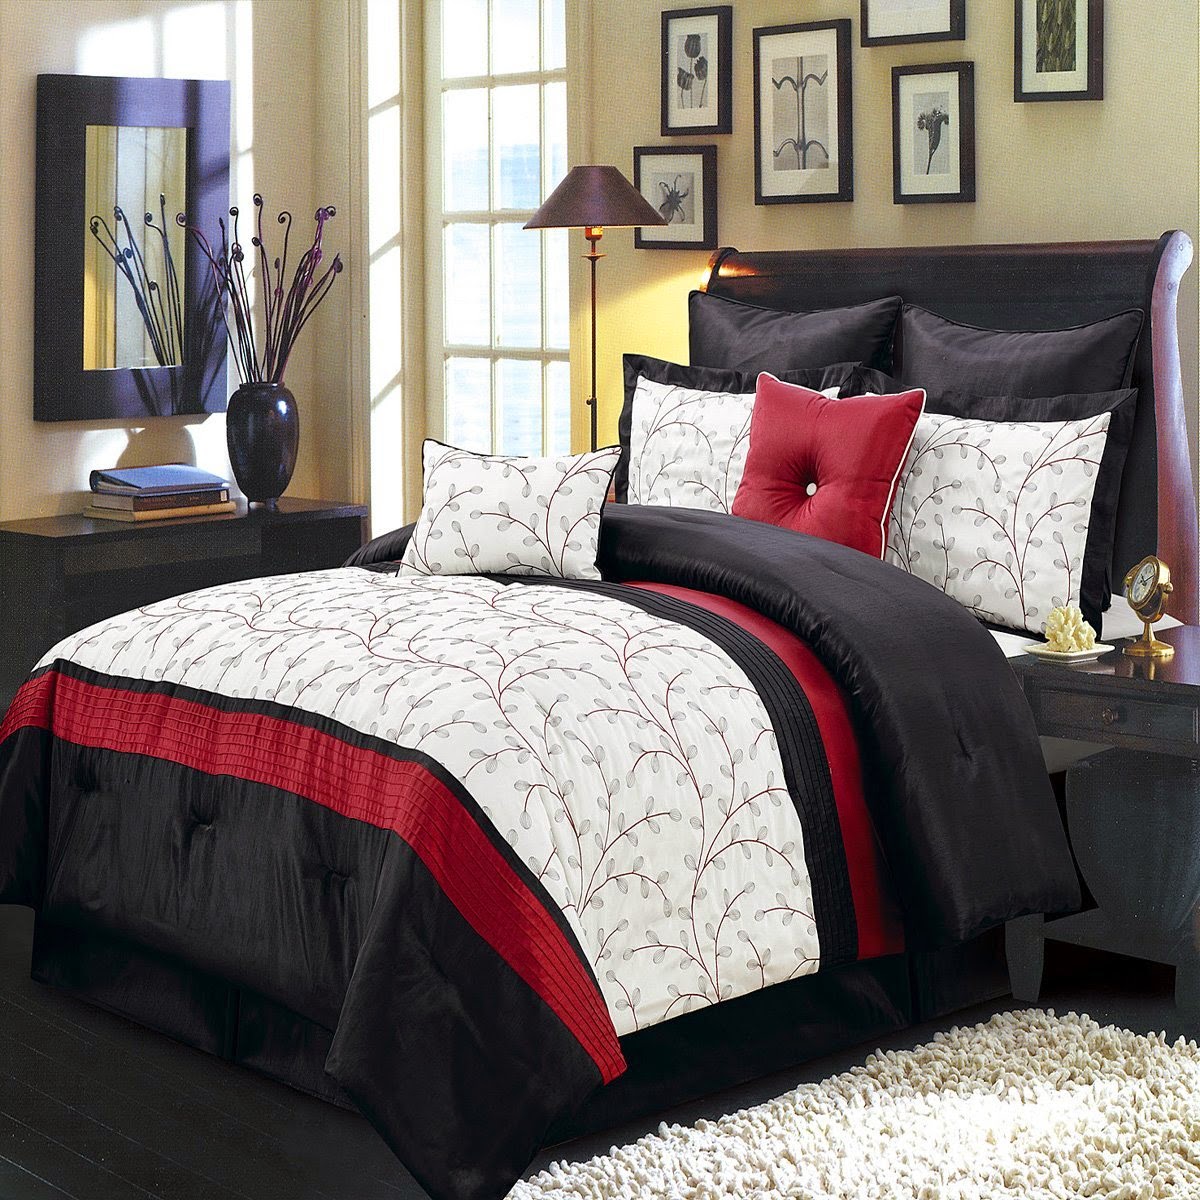 Red White and Black Comforters & Bedding Sets: Bright, Sopshiticated, Alive